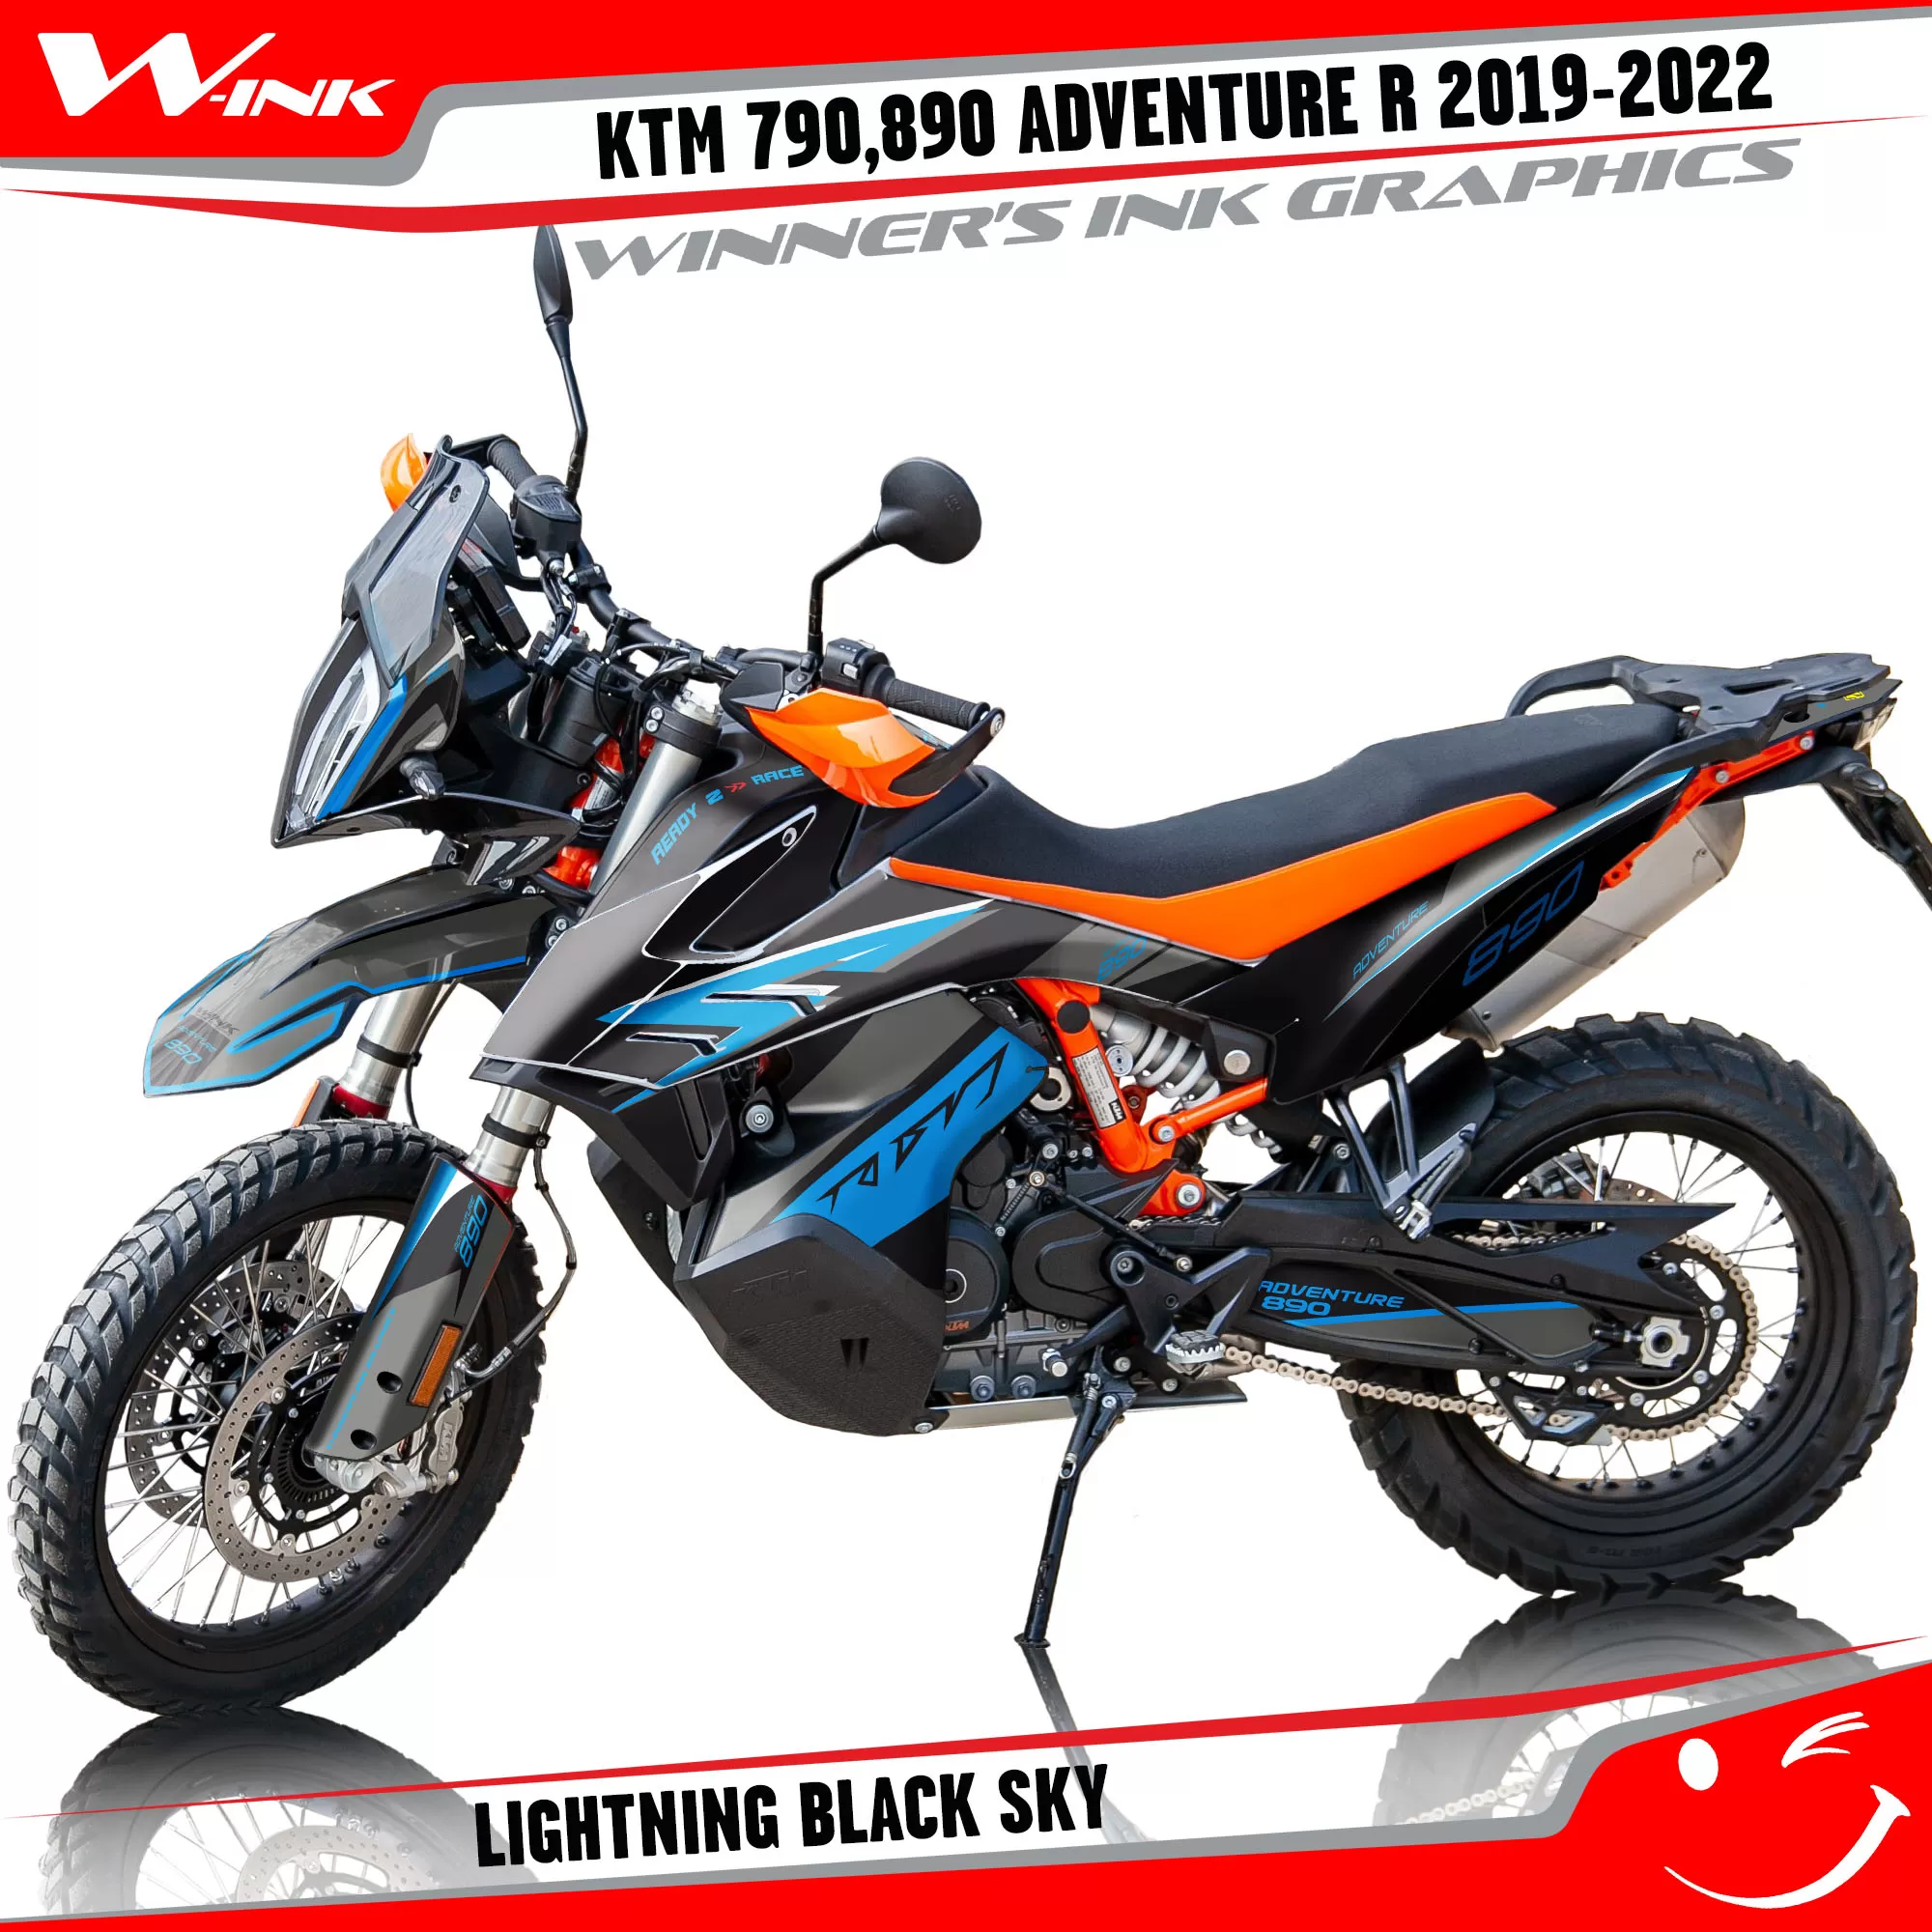 Adventure-R-790-890-2019-2020-2021-2022-graphics-kit-and-decals-with-designs-Lightning-Black-Sky